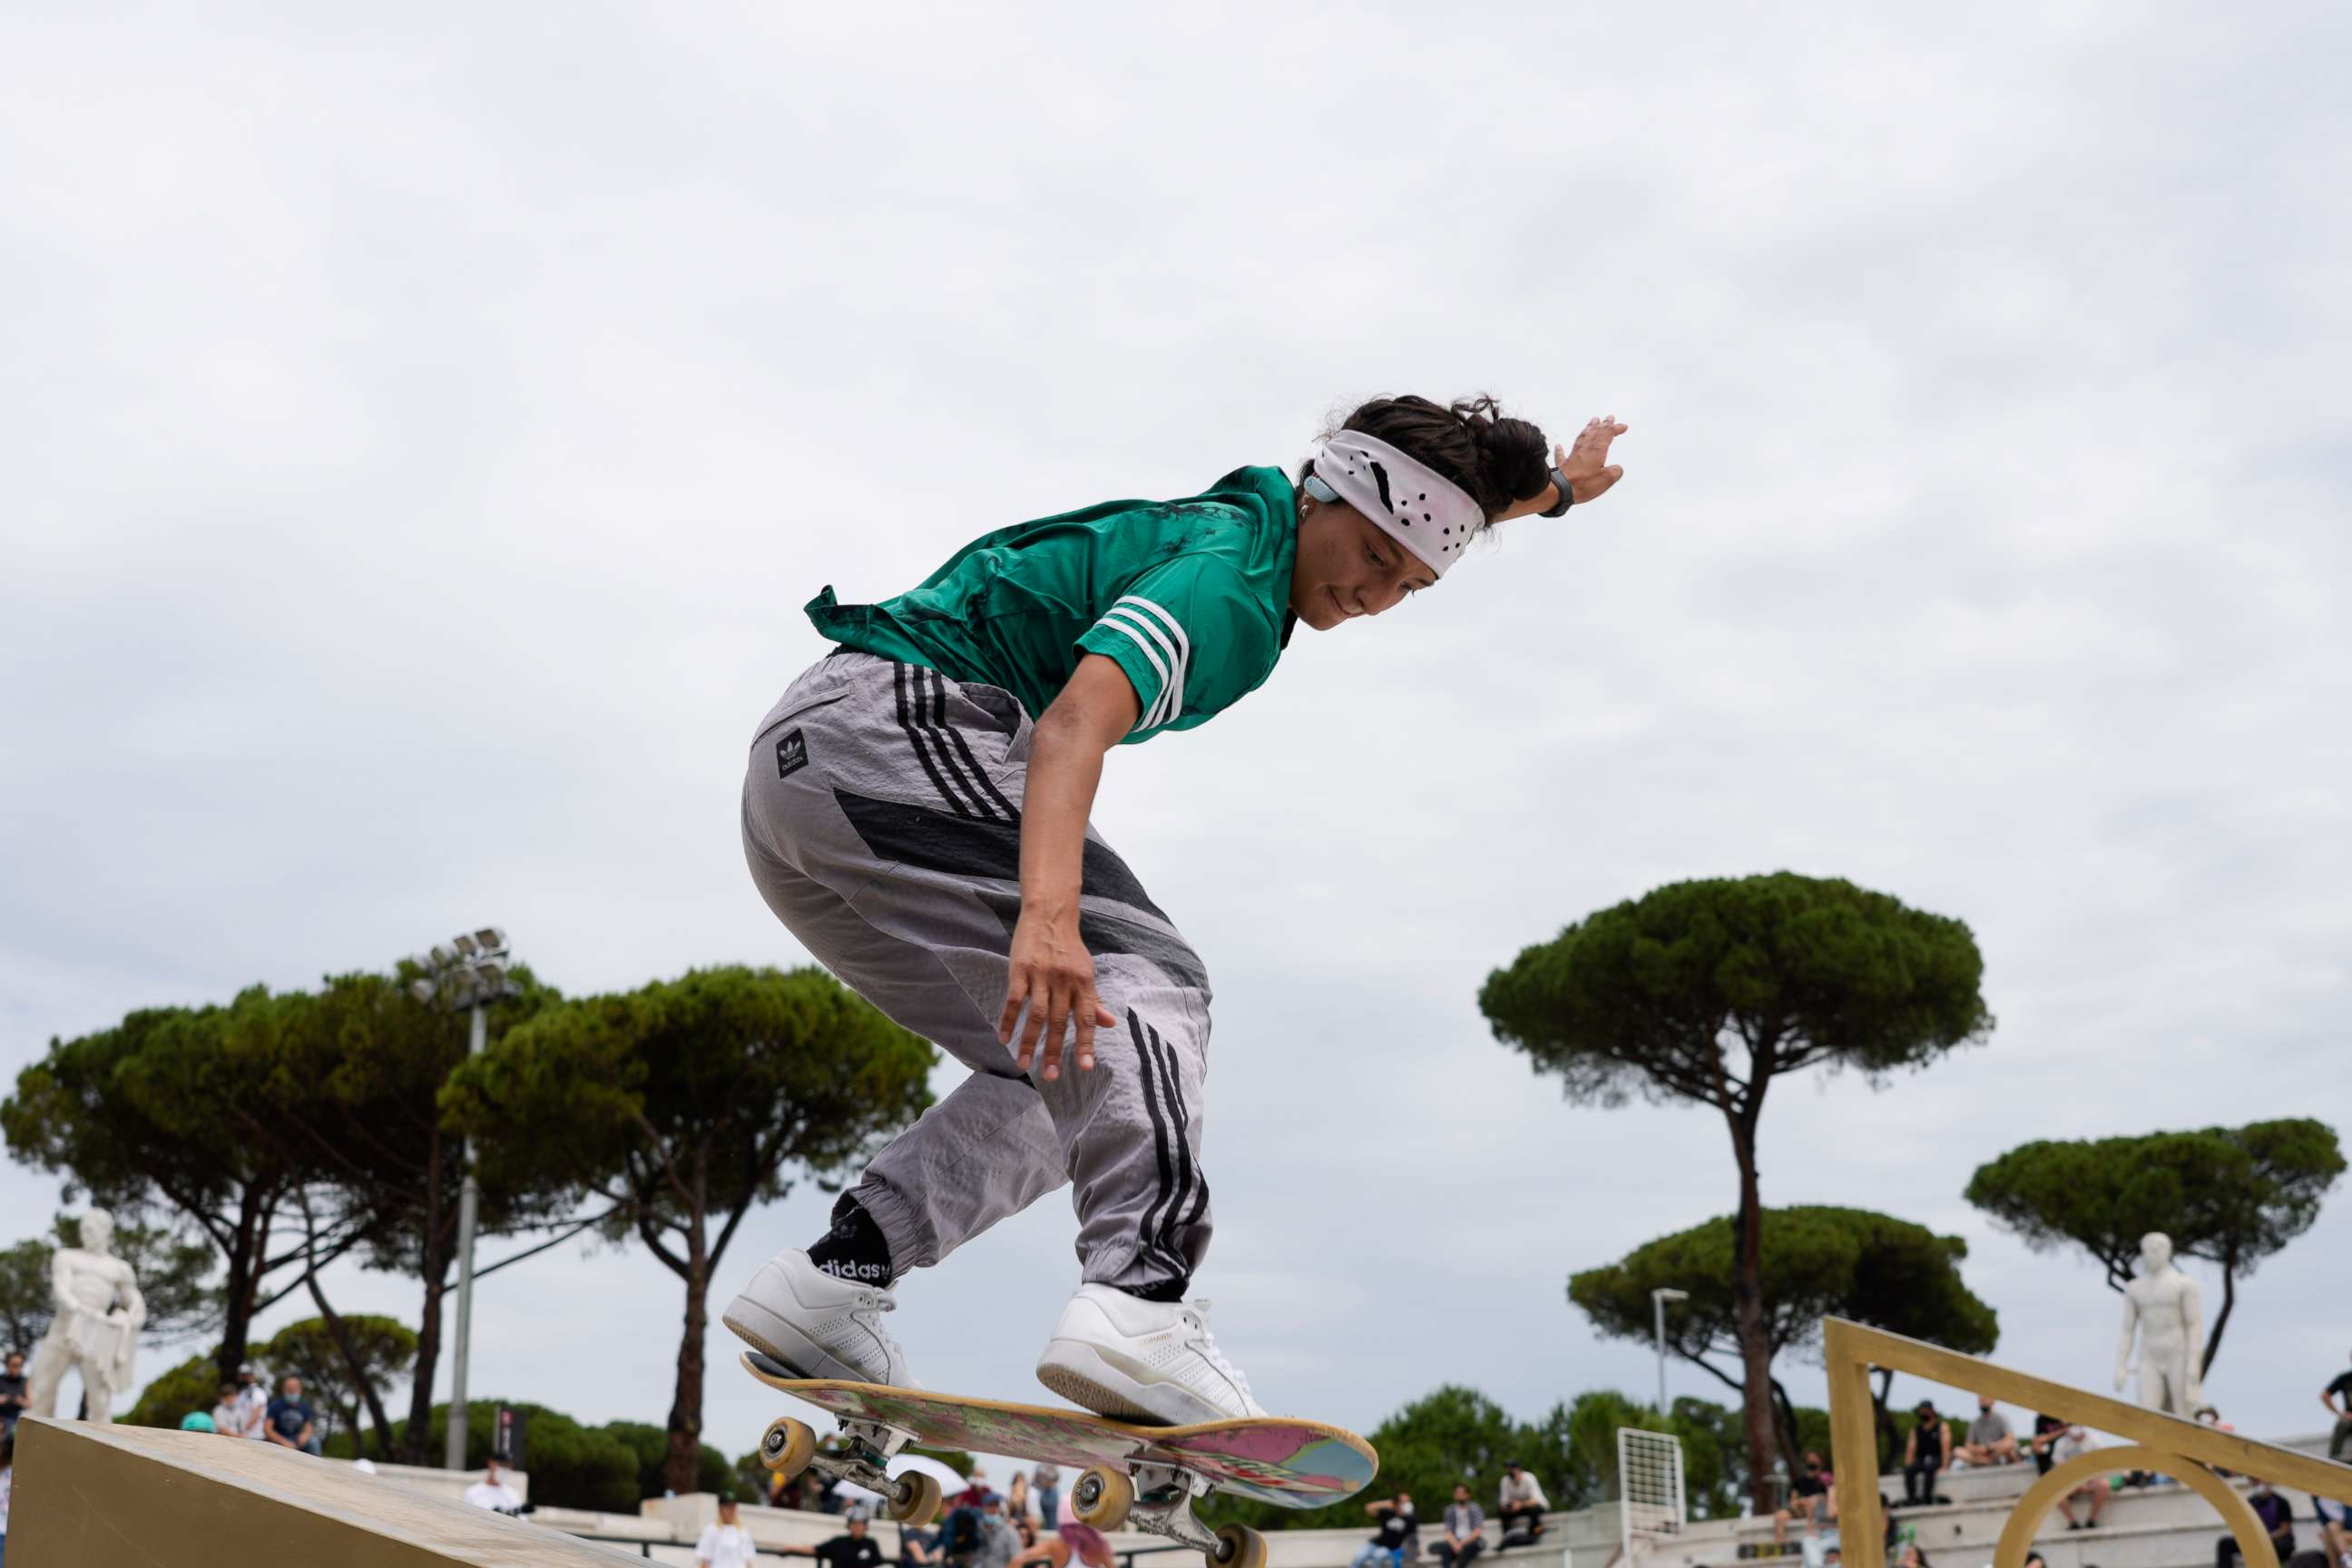 PHOTO: Mariah Duran on the United States competes in the Street Skateboarding World Championships finals, a qualifying event for Tokyo Olympic Games, in Rome, on June 6, 2021.